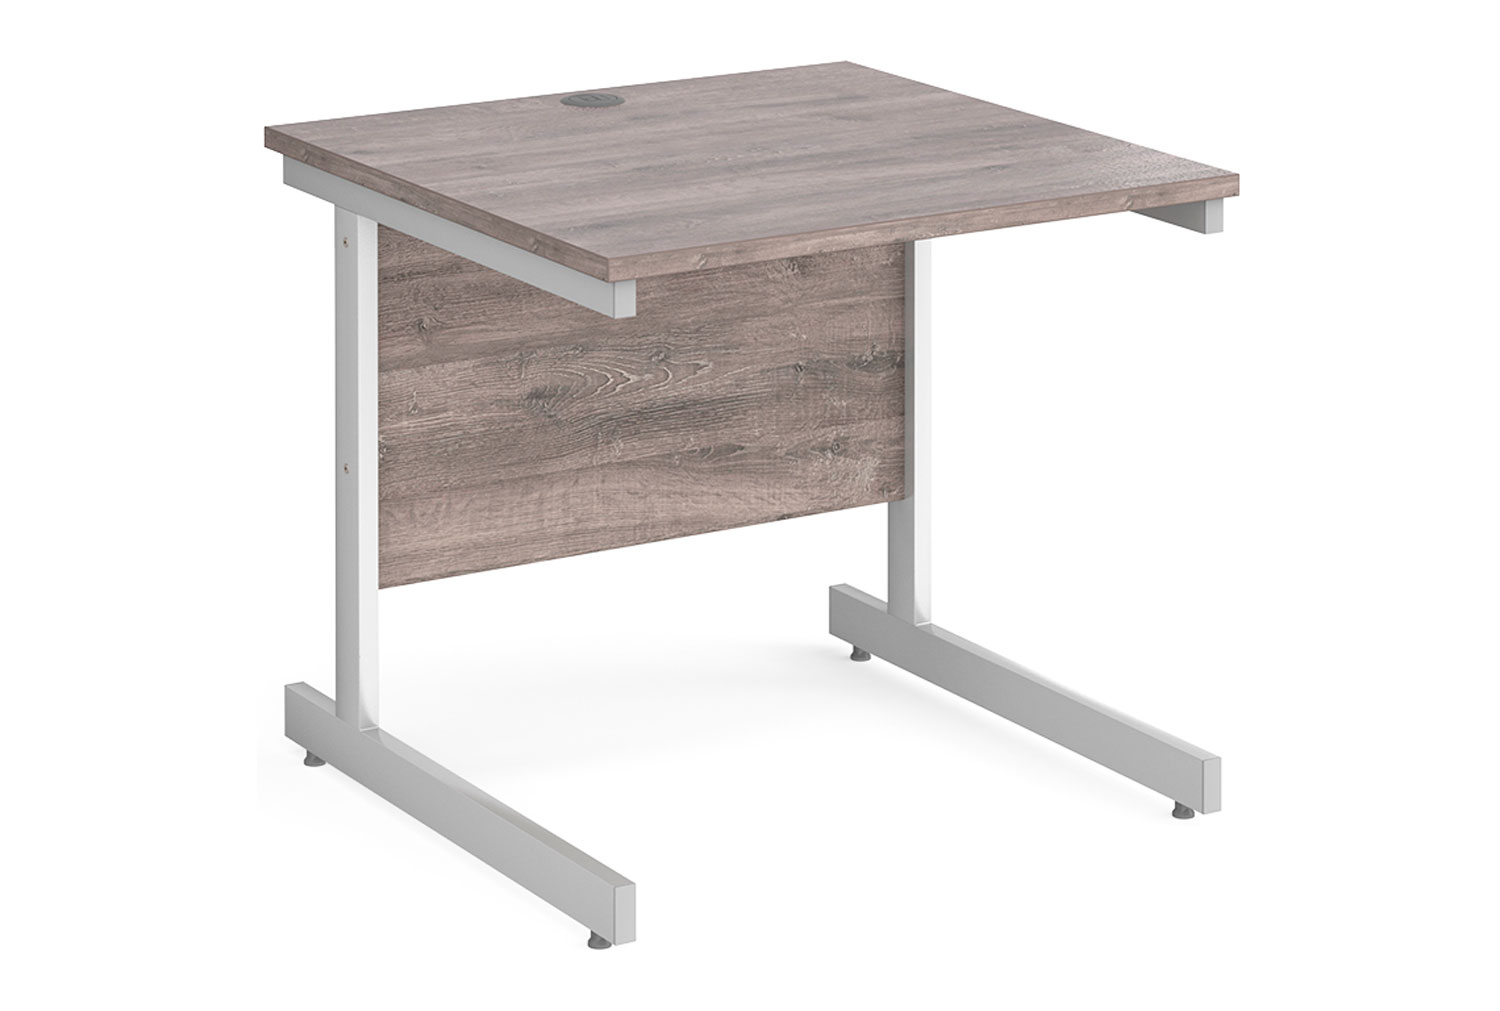 Thrifty Next-Day Rectangular Office Desk Grey Oak, 80wx80dx73h (cm), Express Delivery